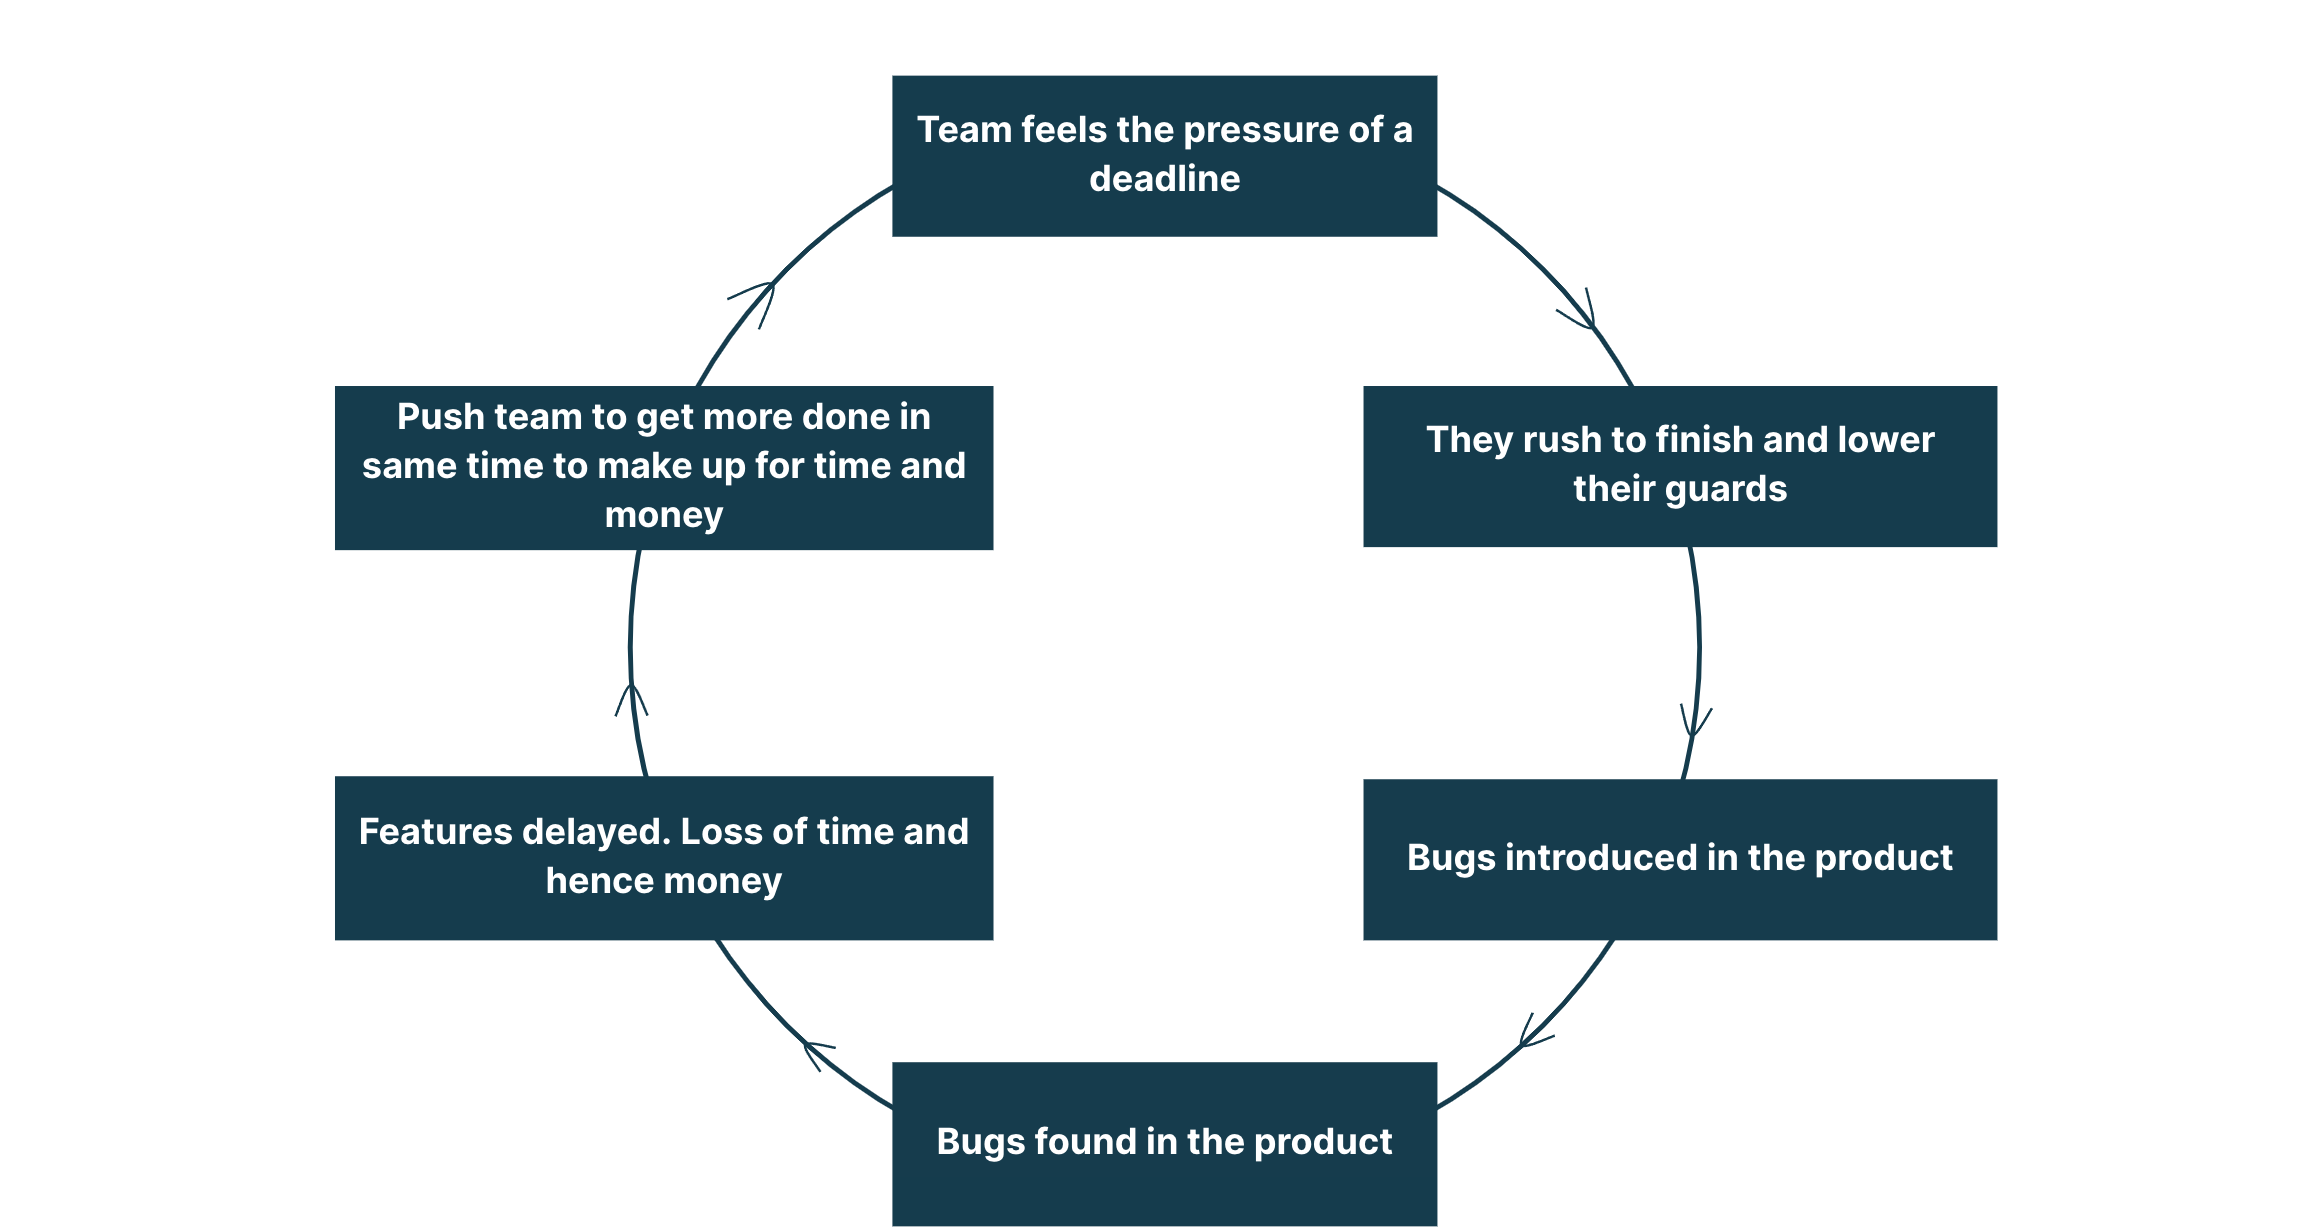 Flow chart showing 6 parts. First says 'Team feels the pressure of a deadline' to 'They rush to finish and lower their guards' to 'Bugs introduced in the product to 'Bugs found in the product' to 'Features delayed. Loss of time and hence money' to 'Push team to get more done in same time to make up for time and money'